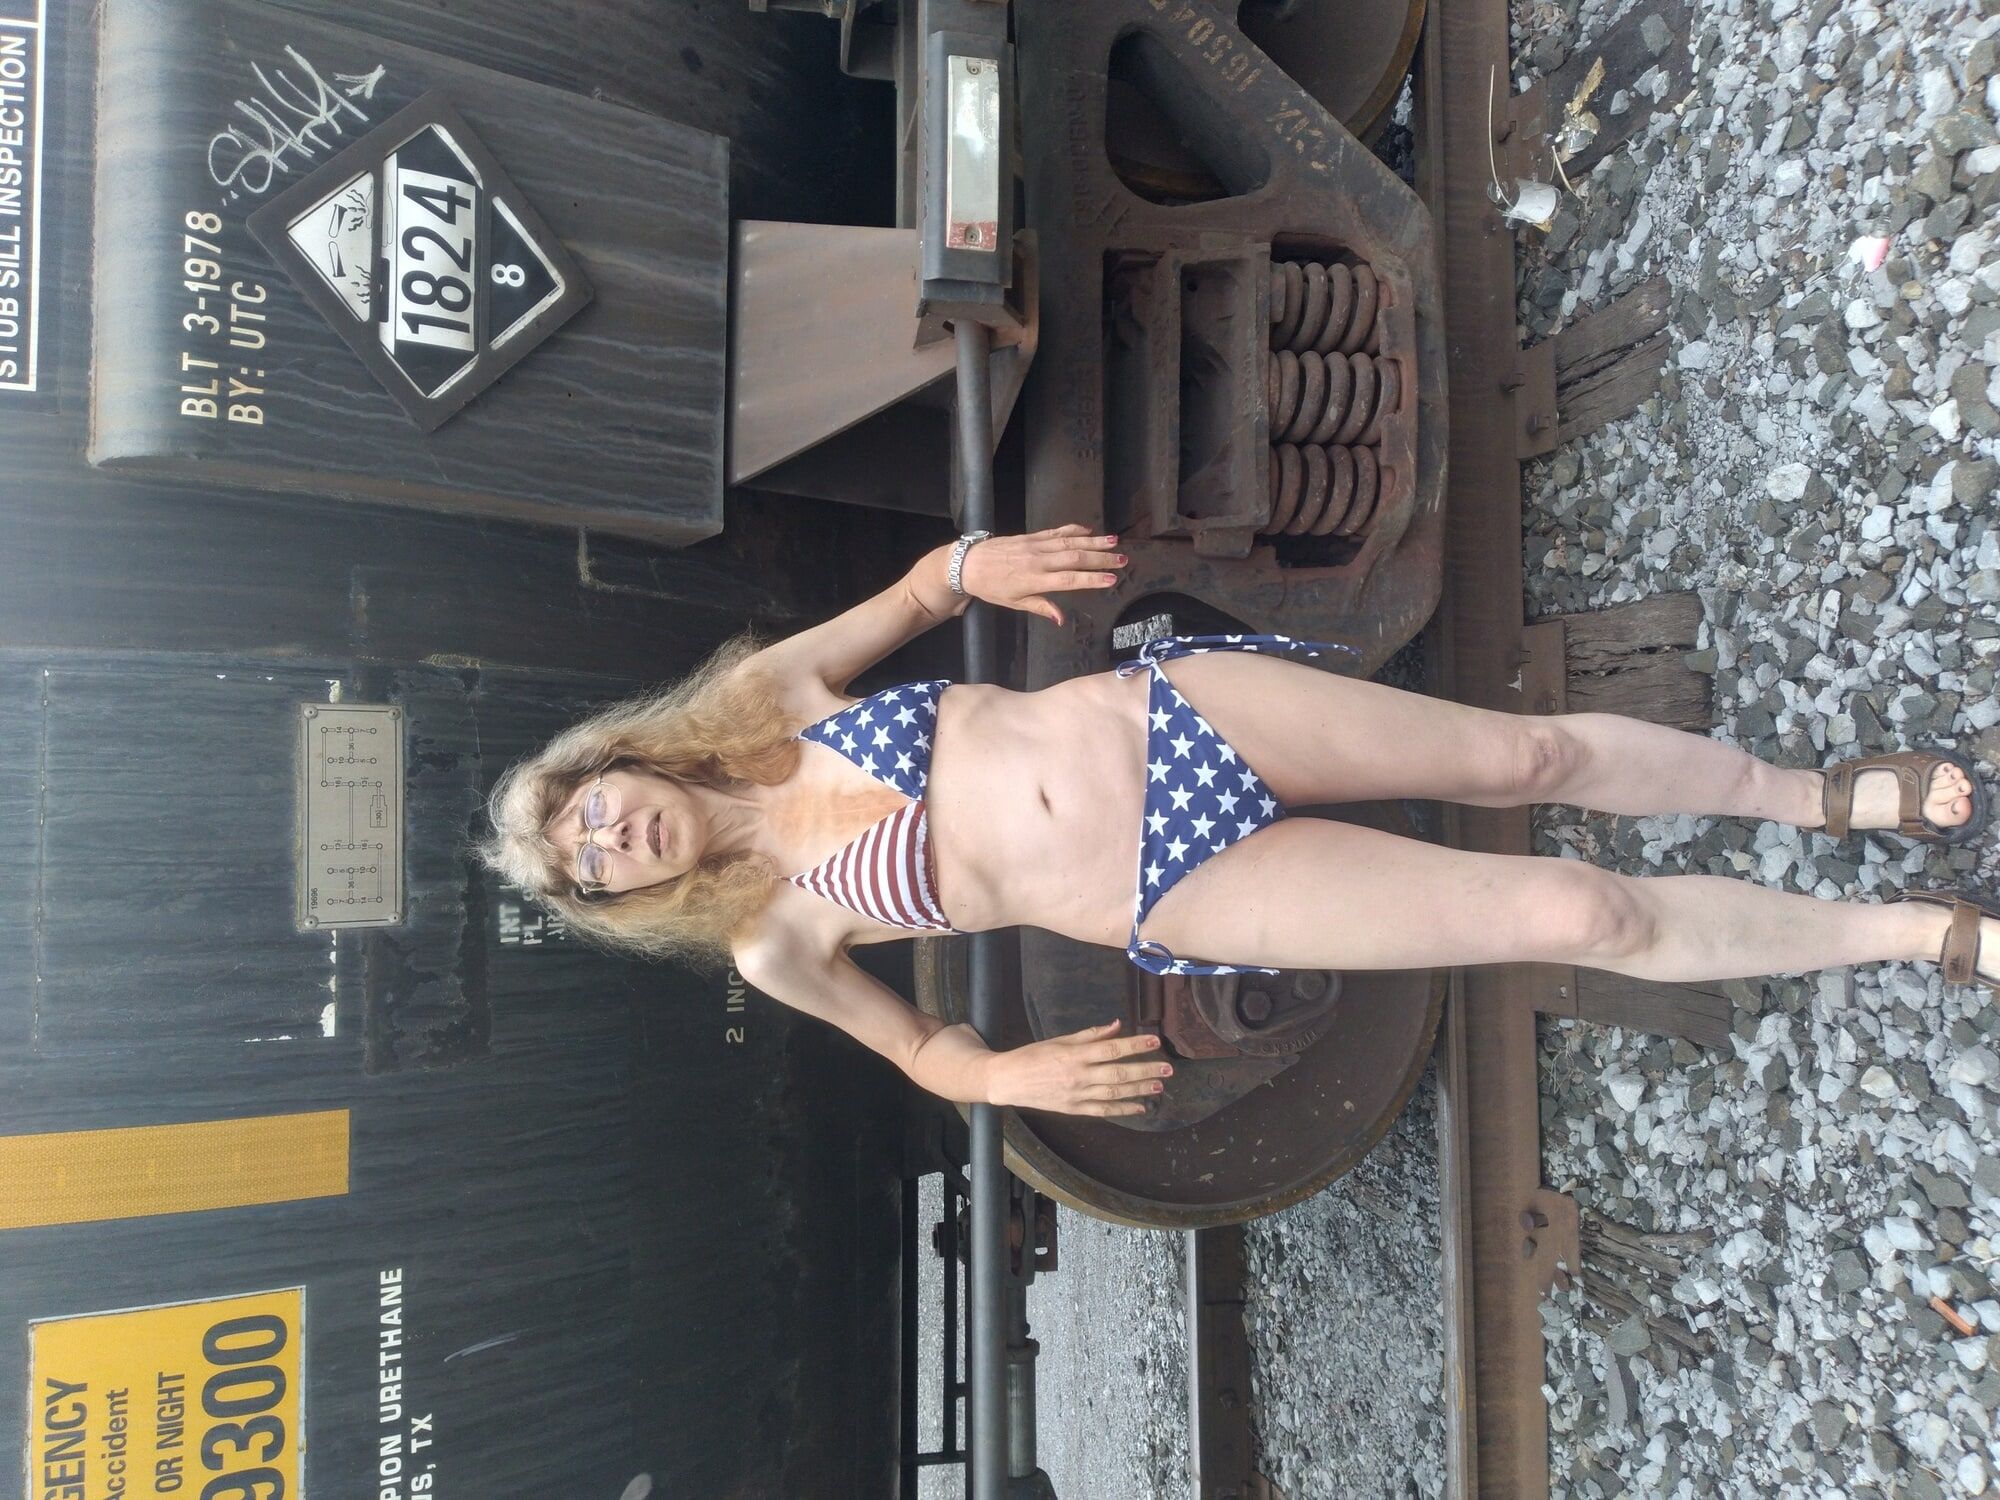 American Train. July 4th release. My best photo set to date. #36